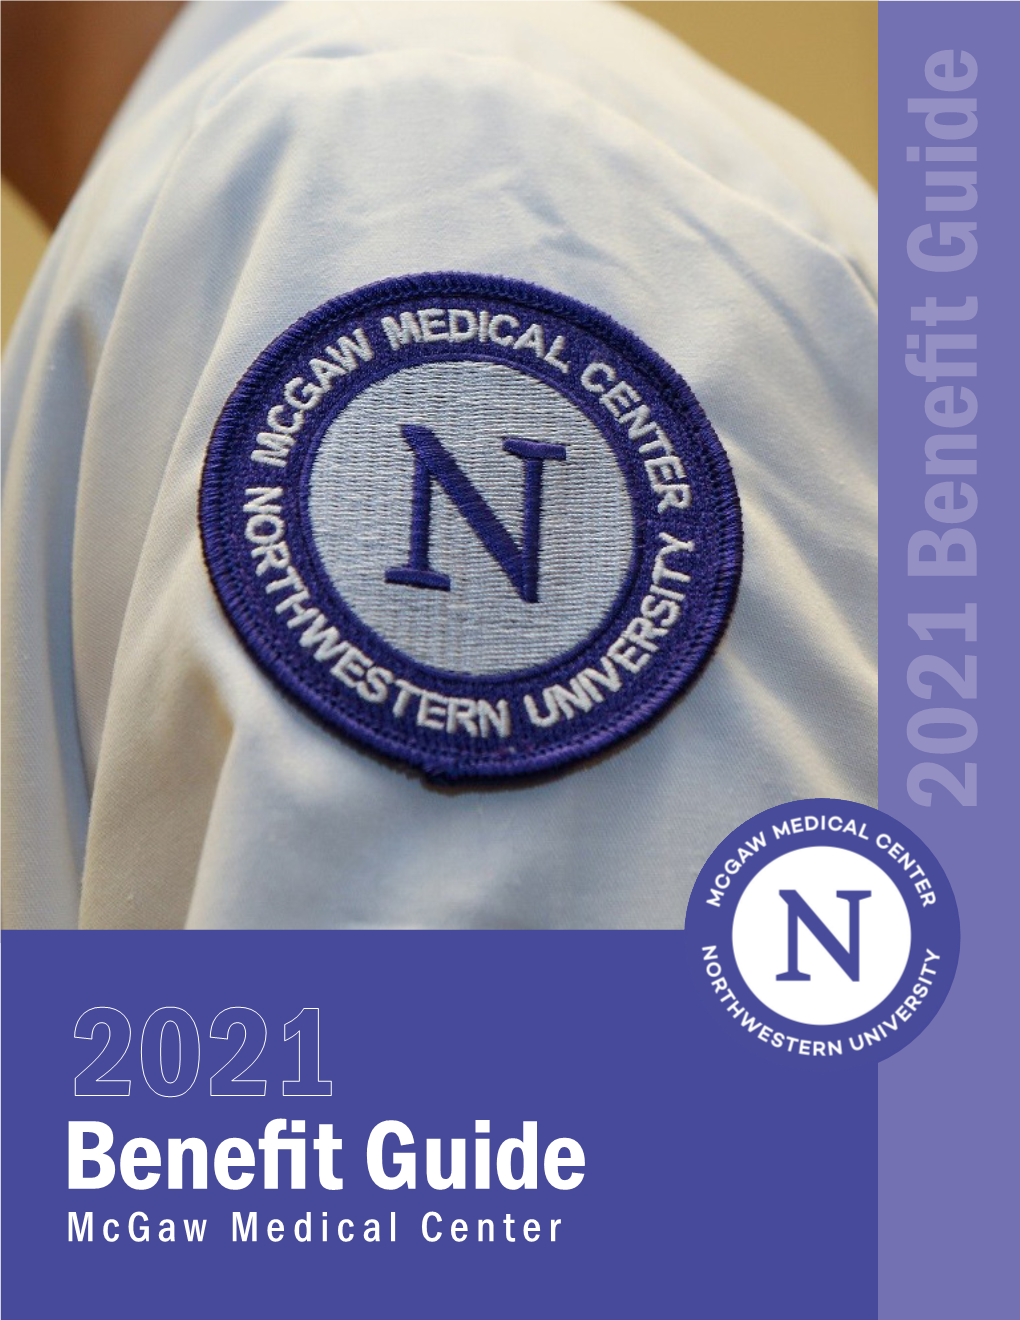 2021 Benefit Guide for Mcgaw Medical Center